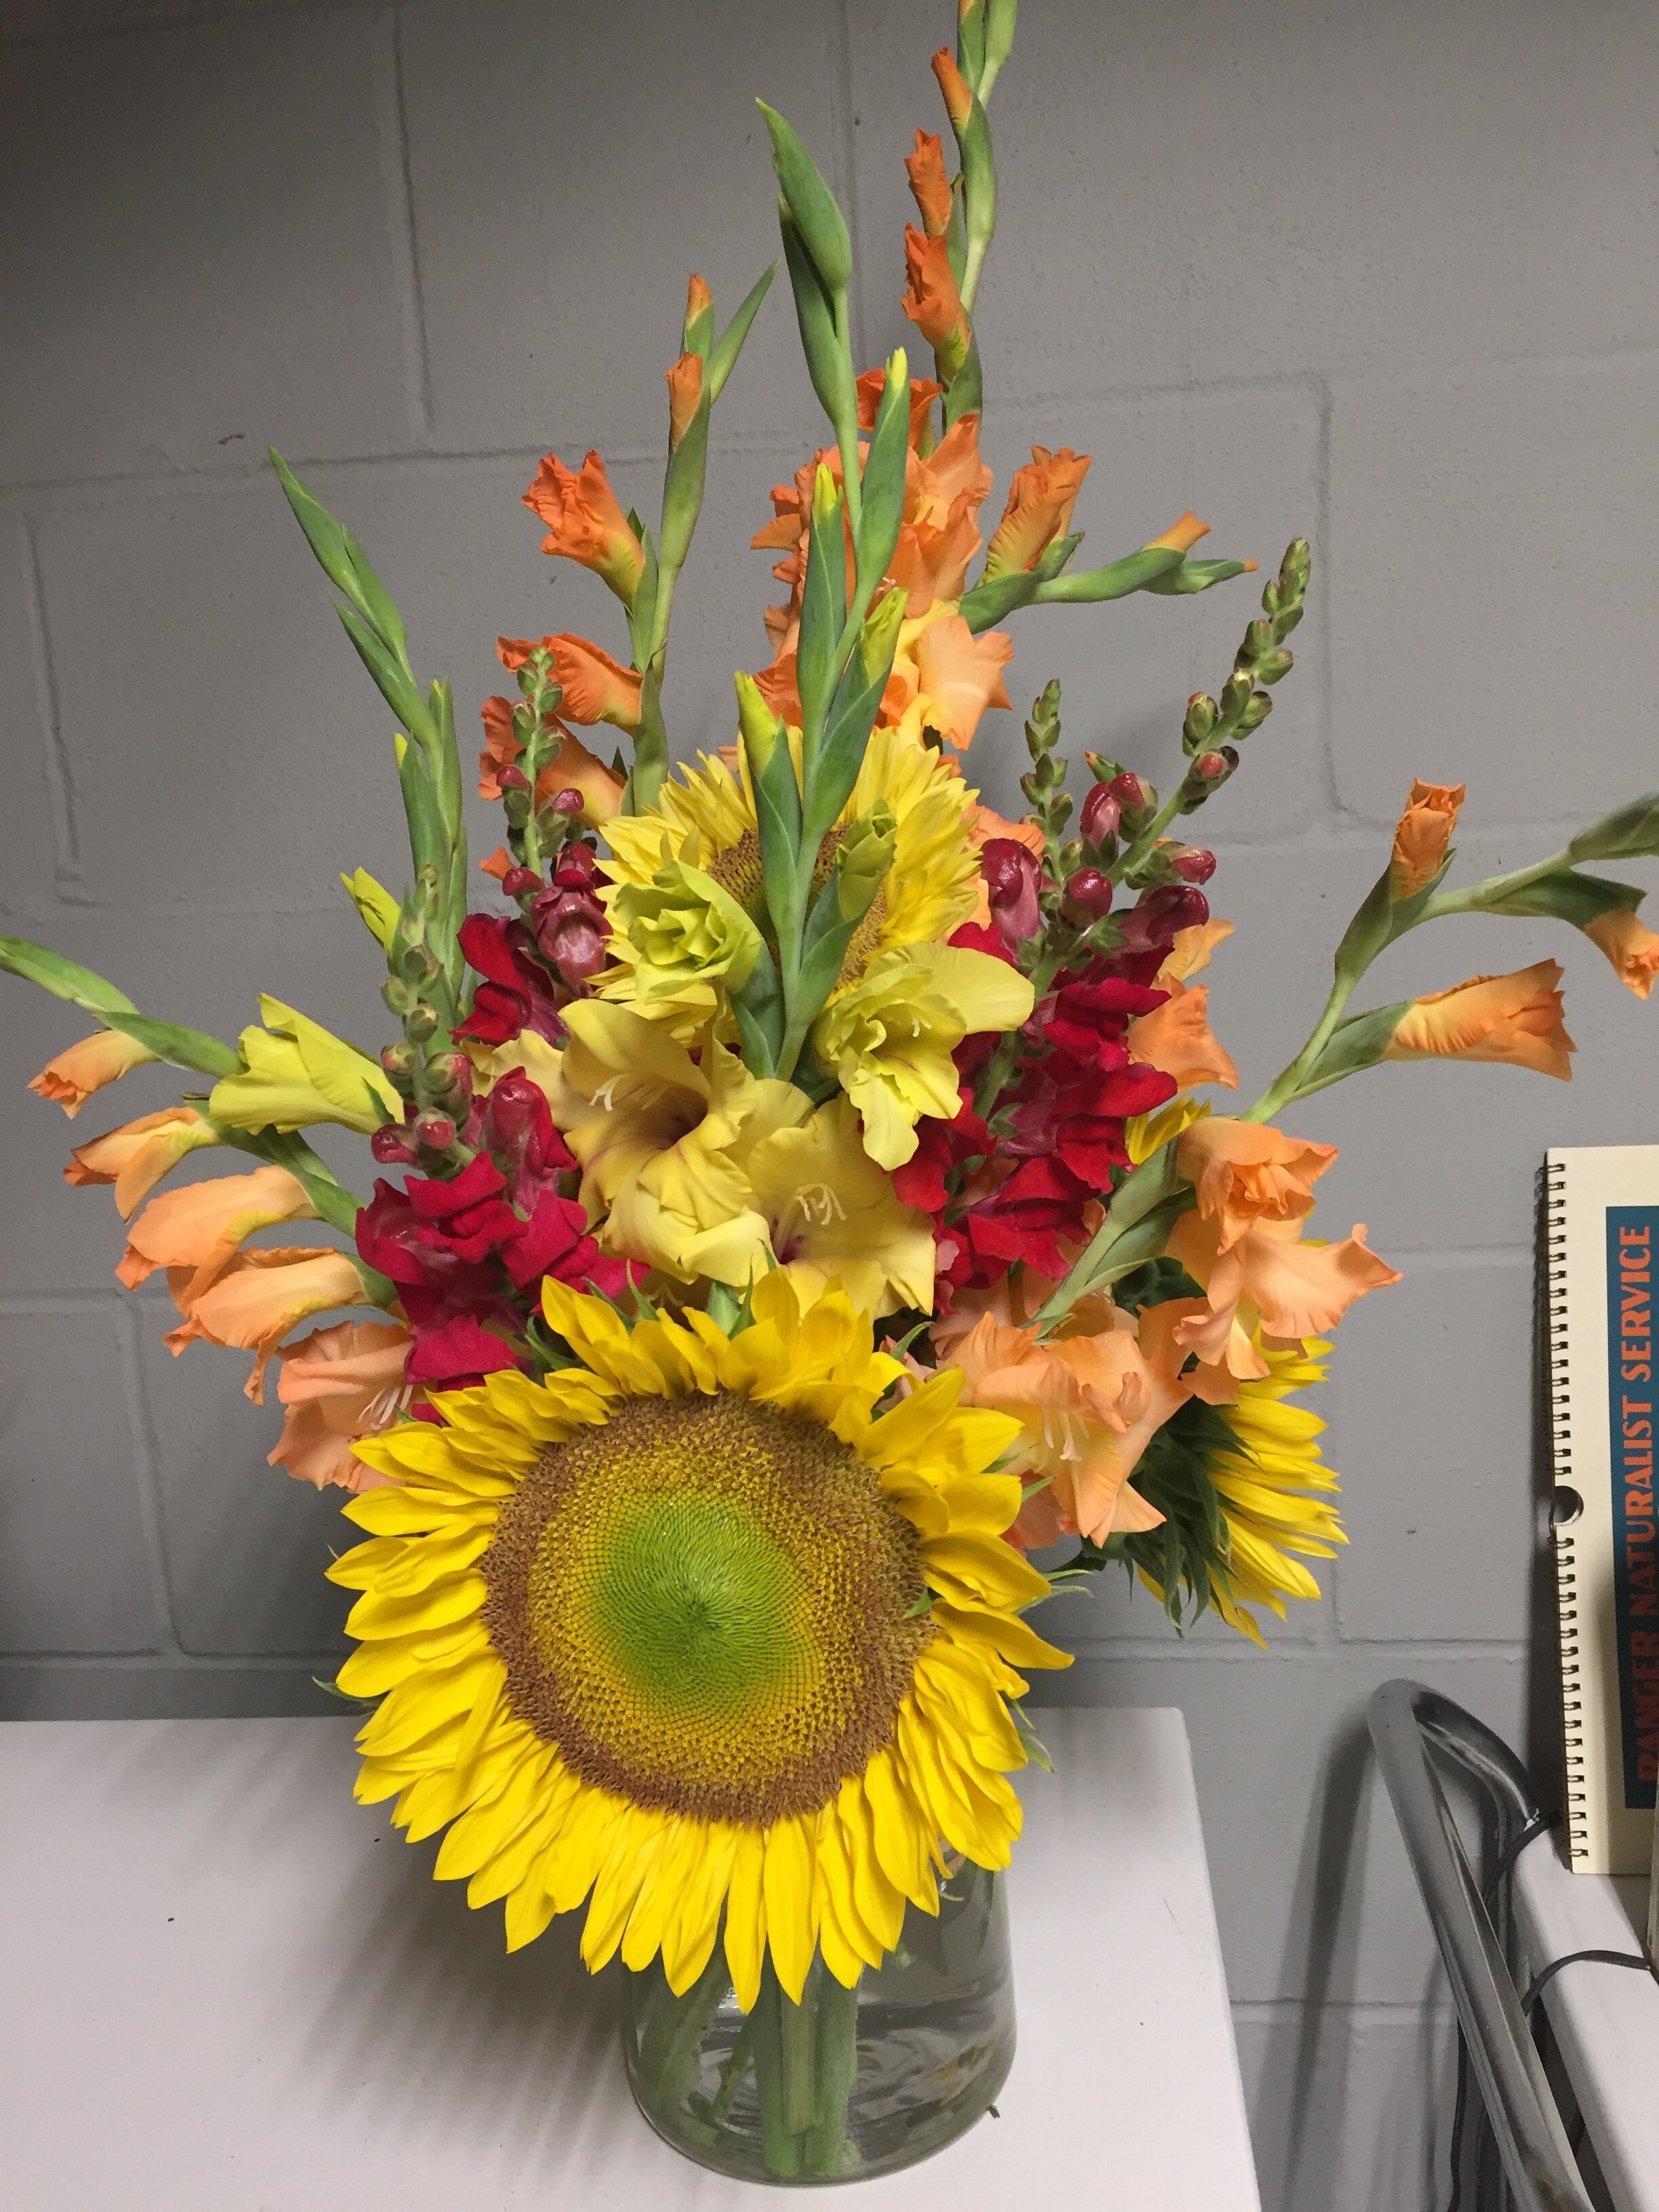 Sunflower and gladiolus bouquet